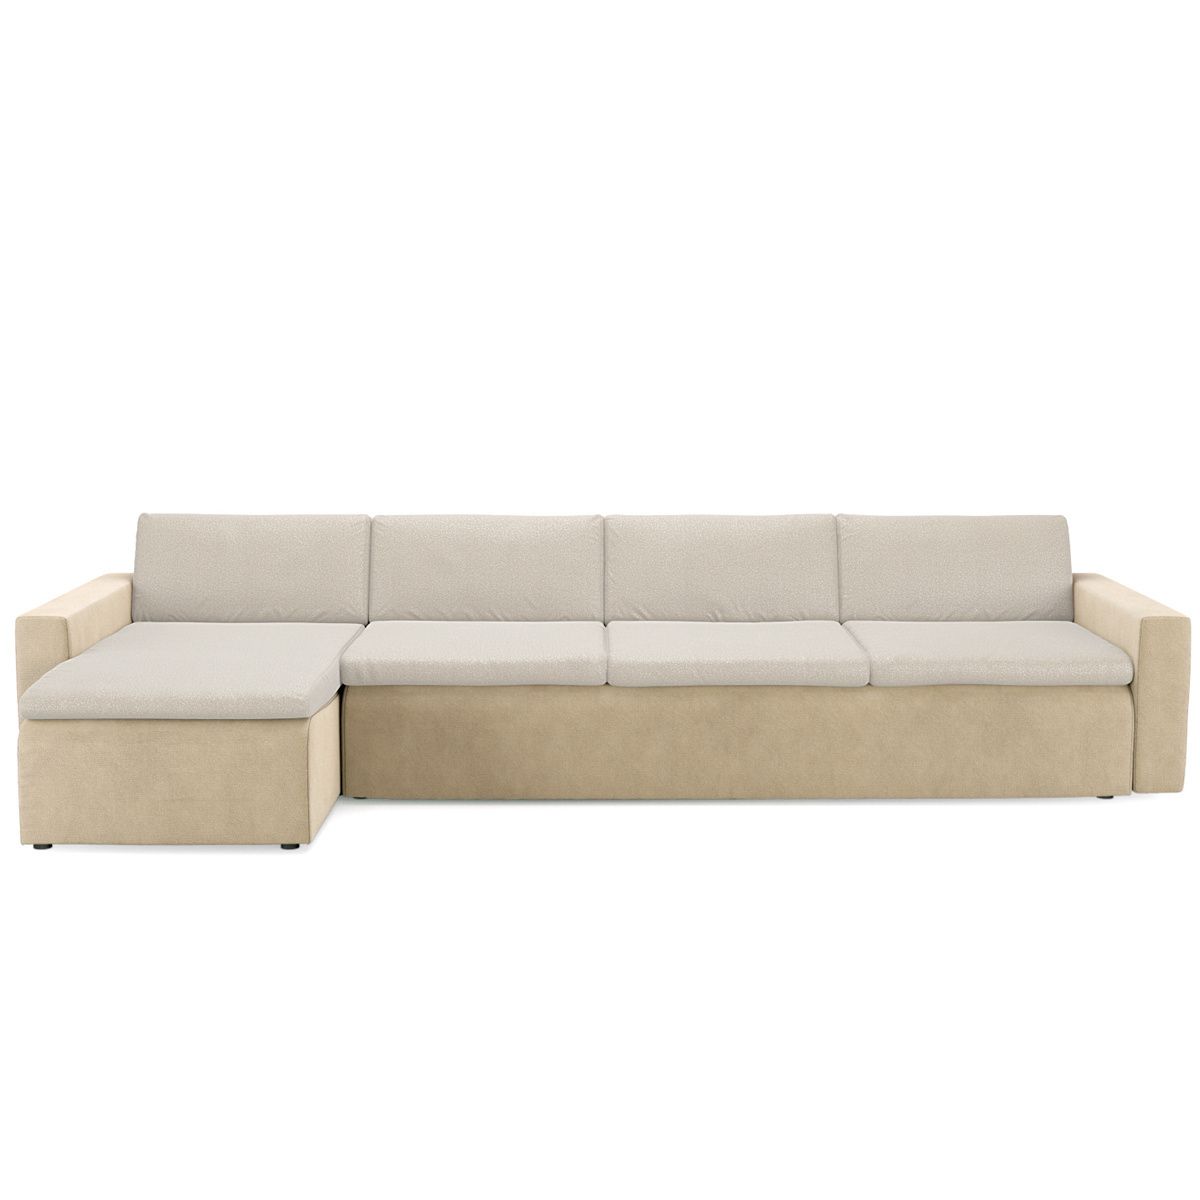 Beige Mohair And Wool Corner Sofa Aldo The Socialite Family Throughout Microfiber Sectional Corner Sofas 